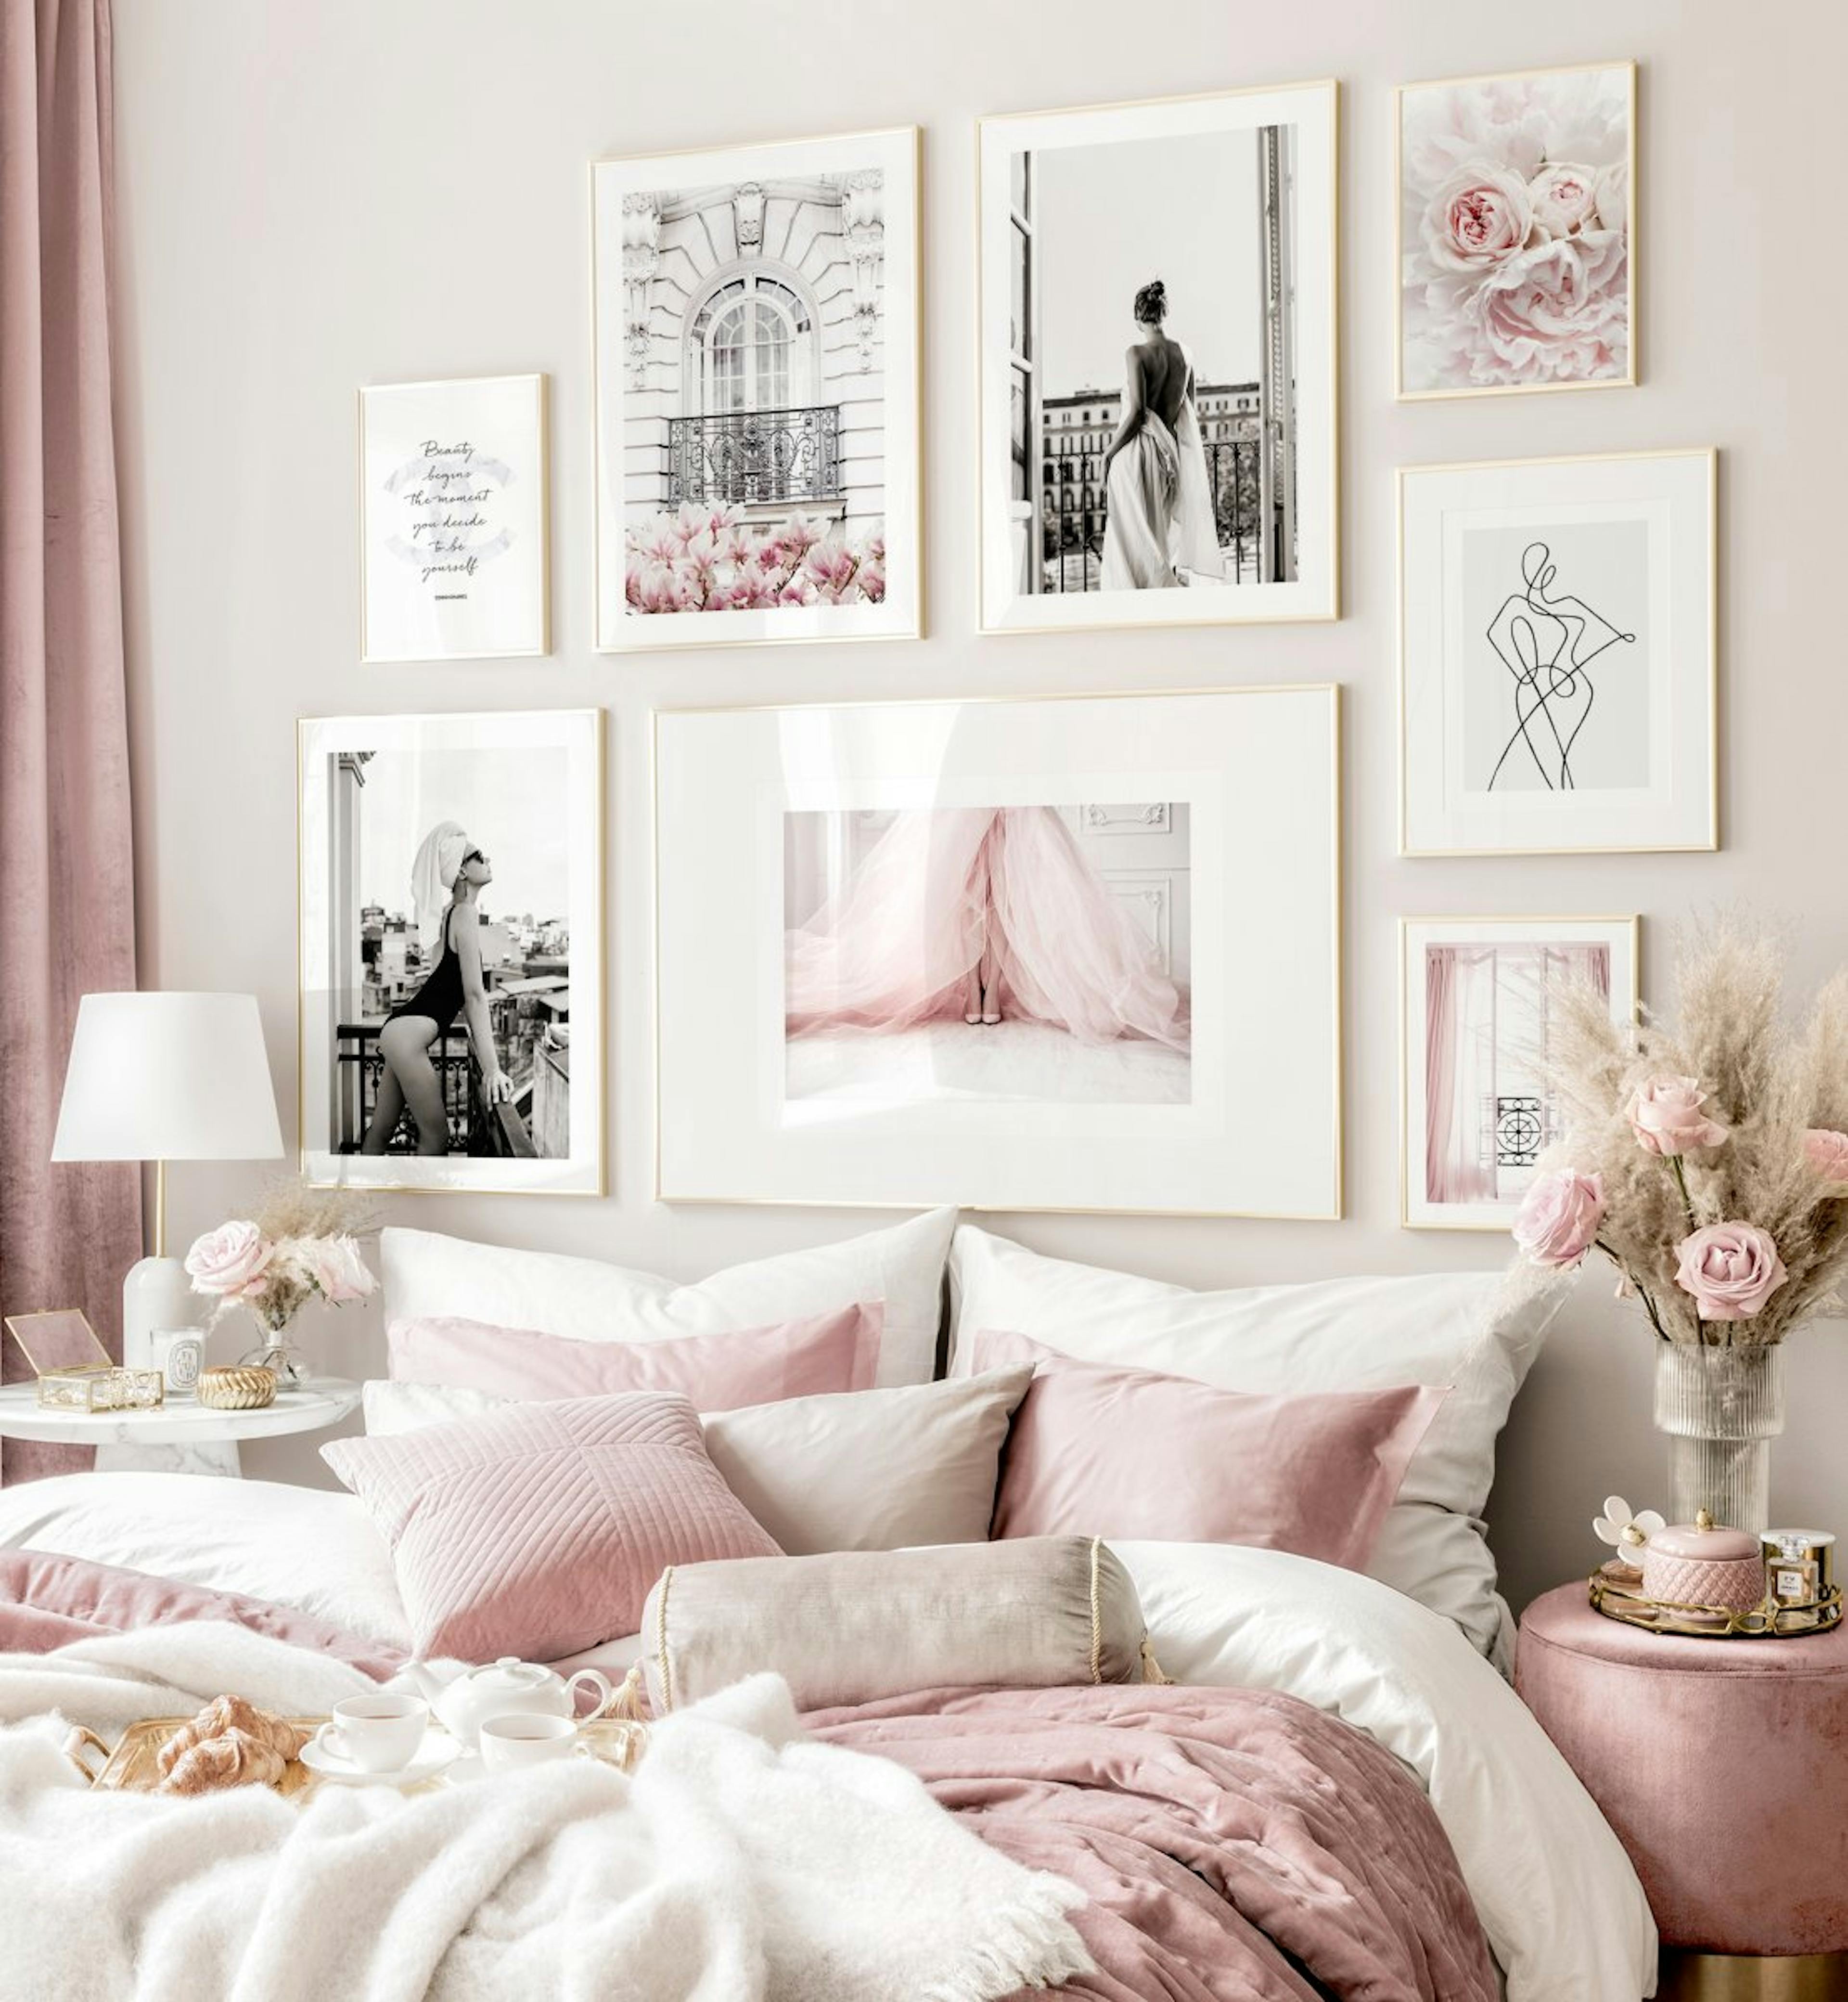 Fashion gallery wall pink bedroom black and white posters golden frames